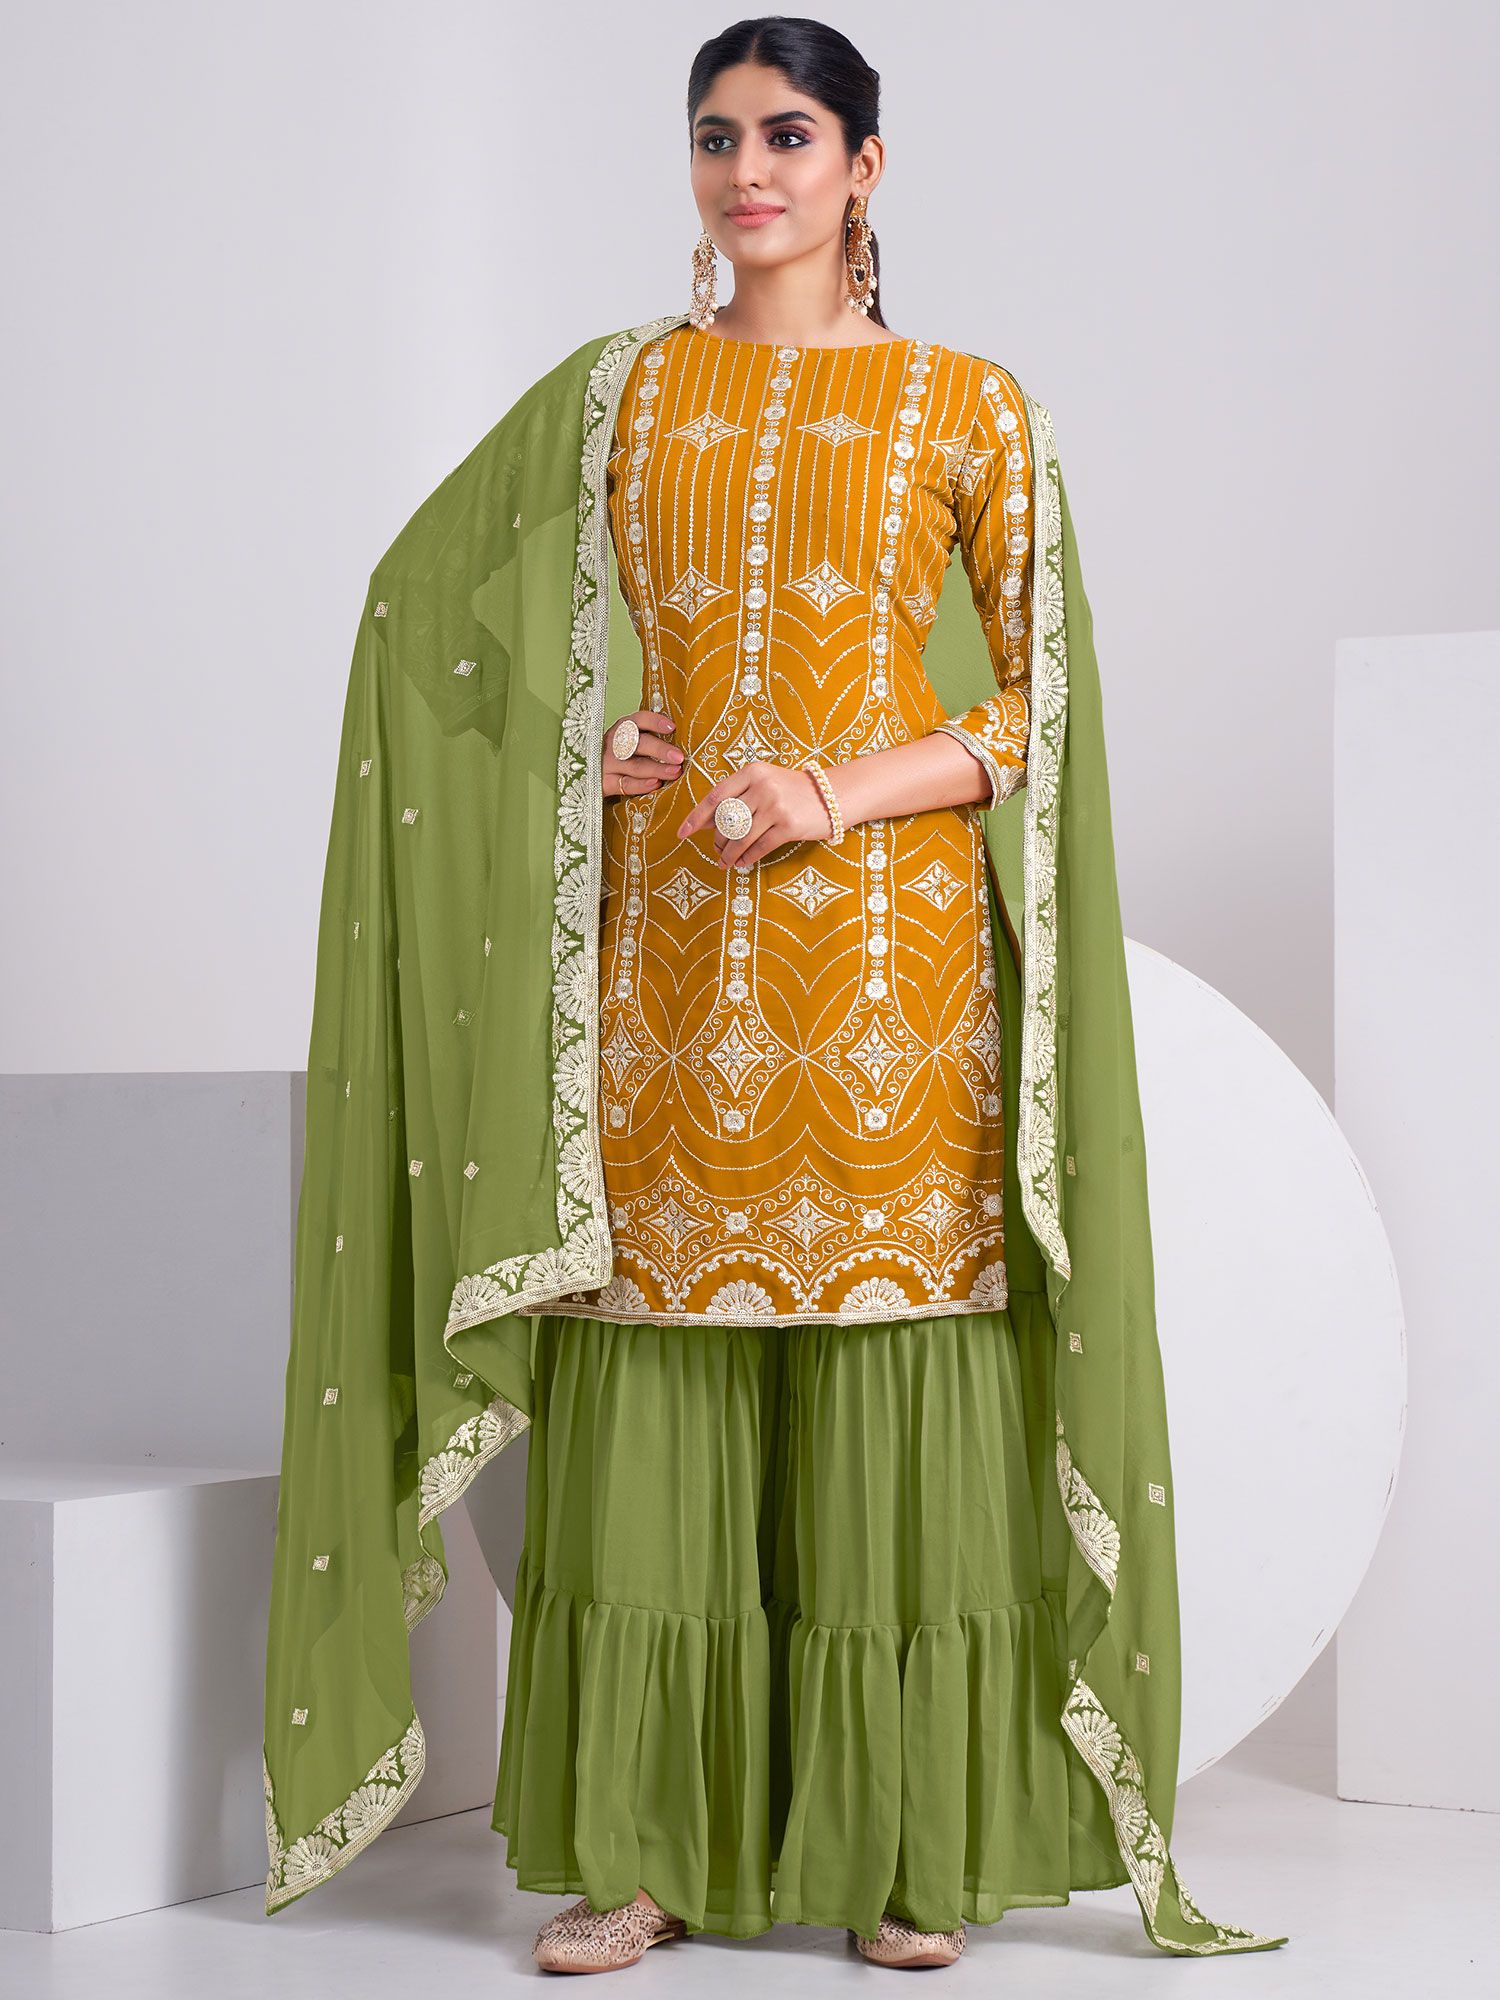 Sharara Designs: Try These Sharara Designs If You're Tired Of Wearing Plain  Salwar Suits